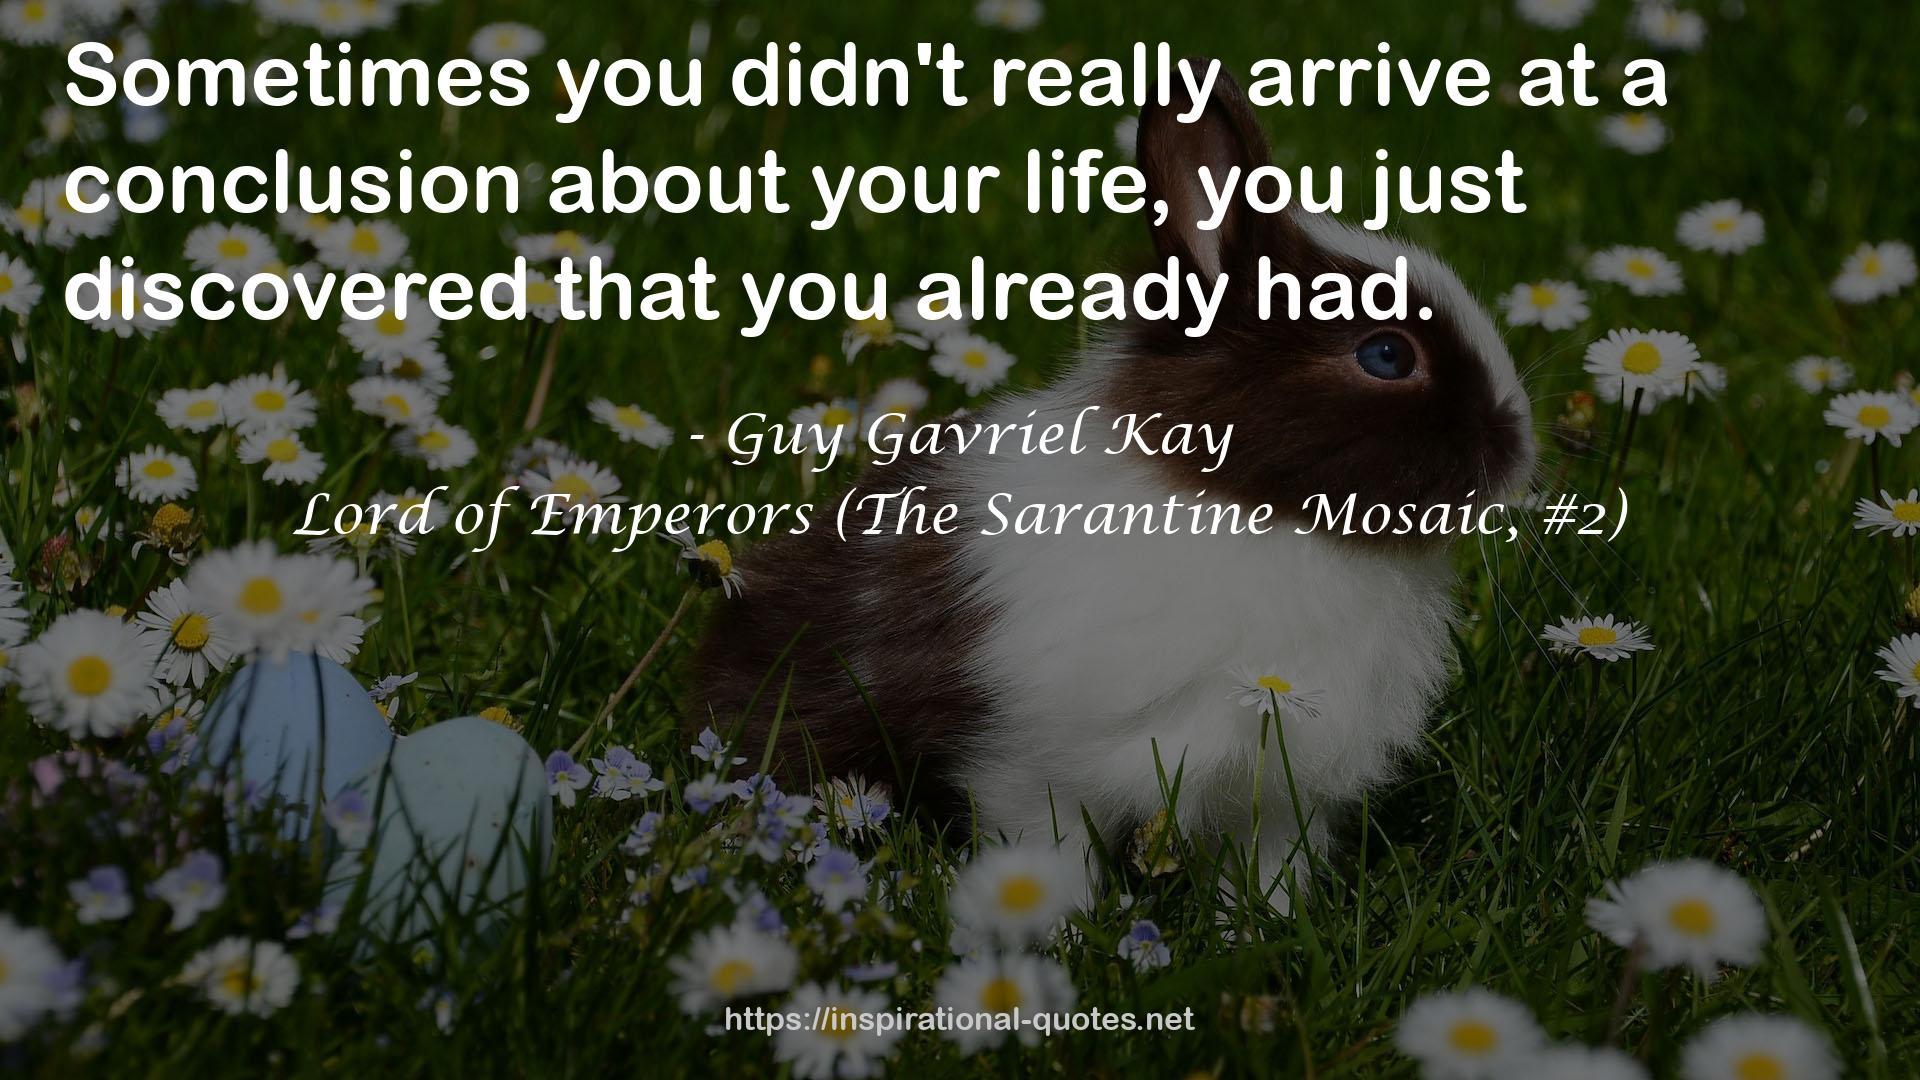 Lord of Emperors (The Sarantine Mosaic, #2) QUOTES